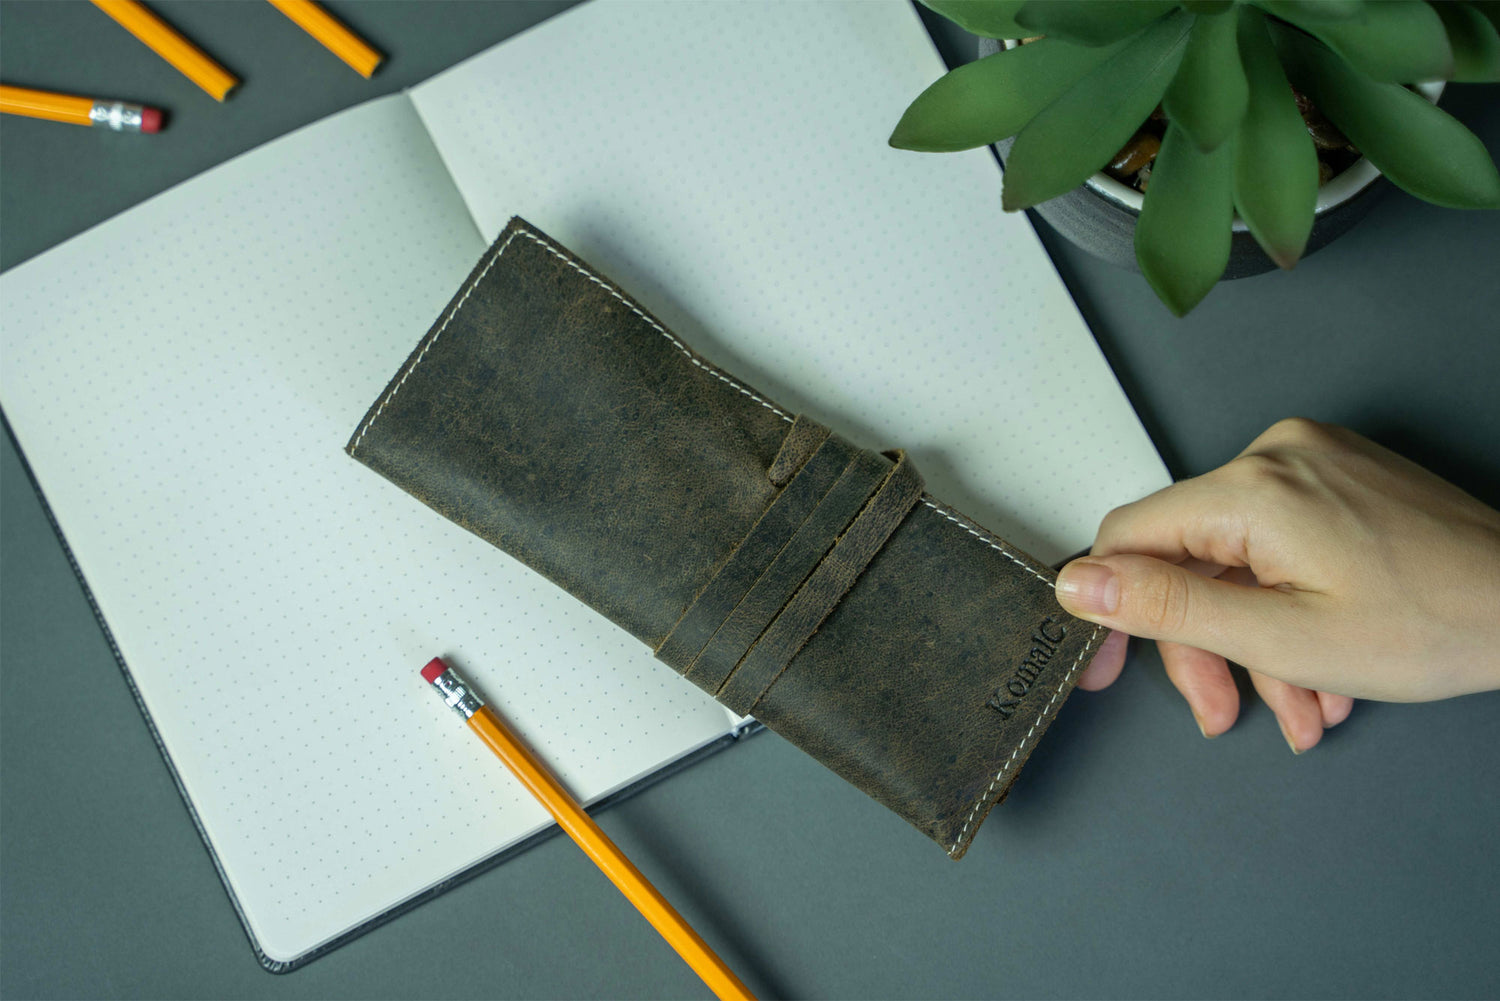 craoopii Leather Pencil Case Pencil Bag Pouch With Zipper Pen Holders  Handmade Genuine Leather For Men Women Businessmen And Artists Home Work  Office.